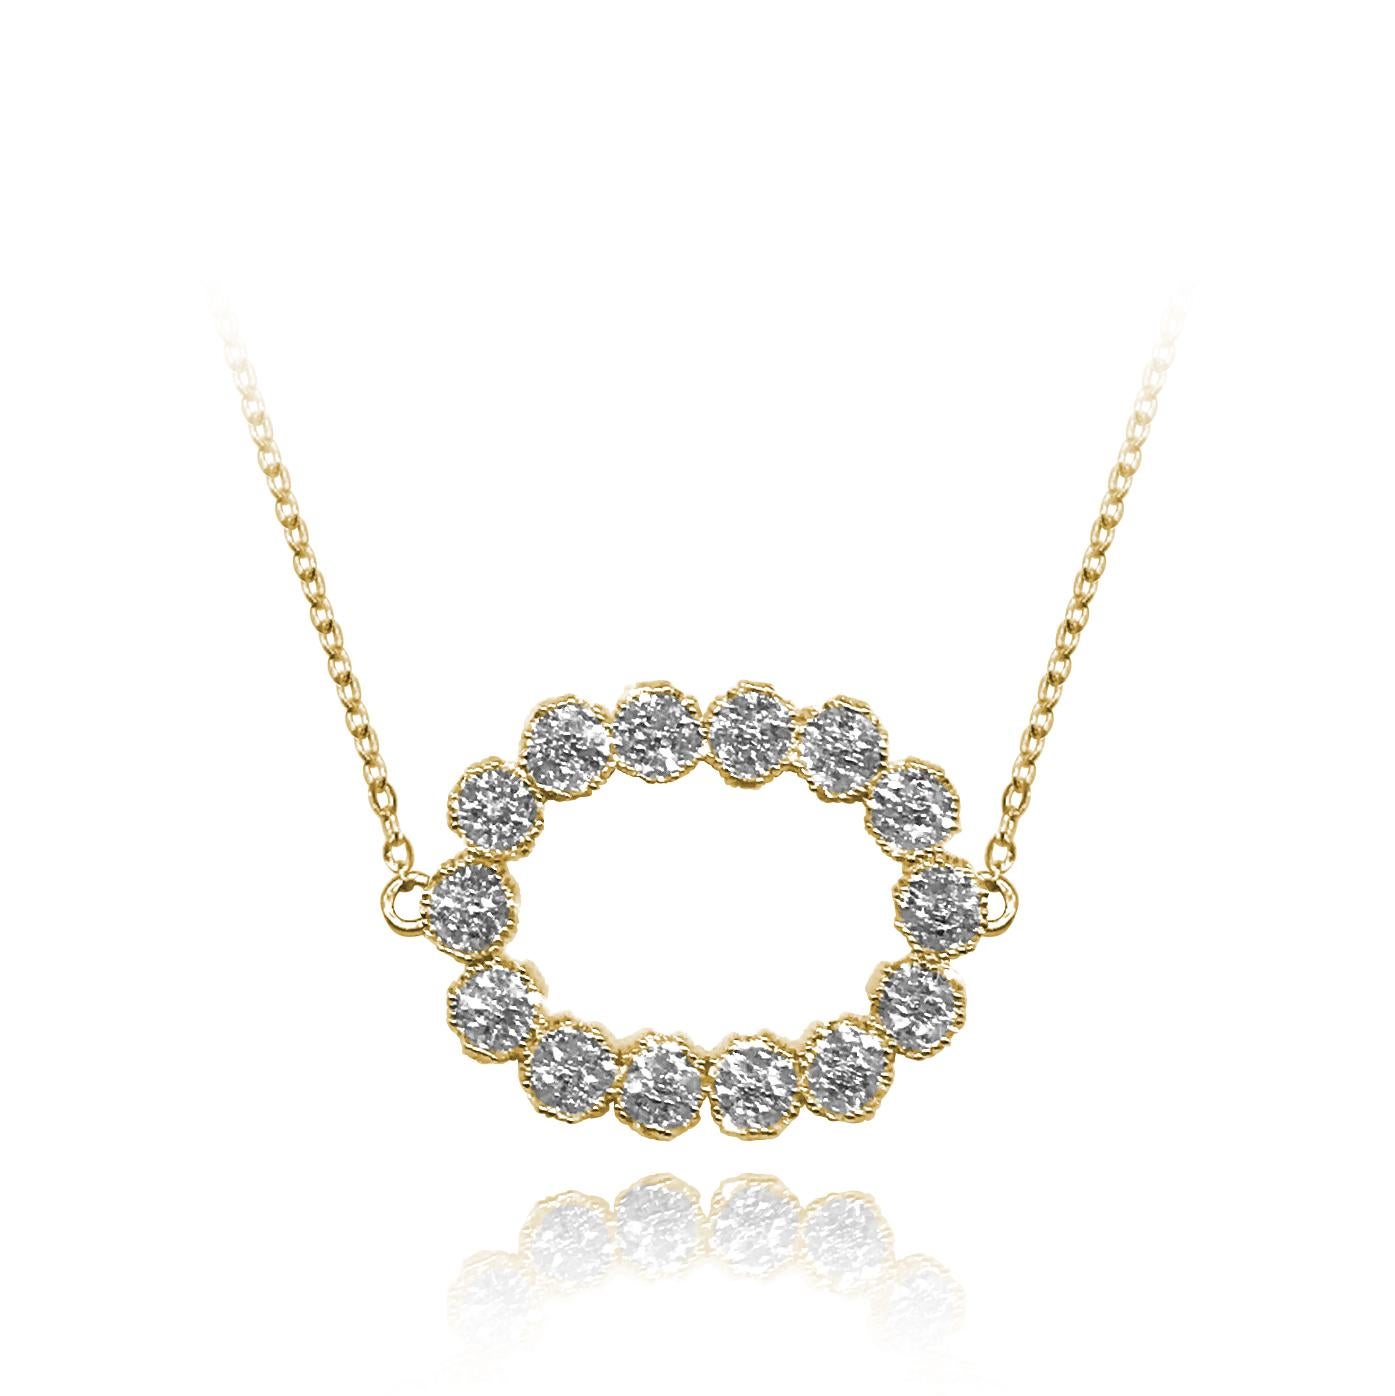 Whatever the season, take a little natural beauty with you everywhere you go. This elegant medium oval blossom gemstone necklace is the perfect complement to any style, day or night. An adjustable .925 sterling silver chain necklace to fit all sizes